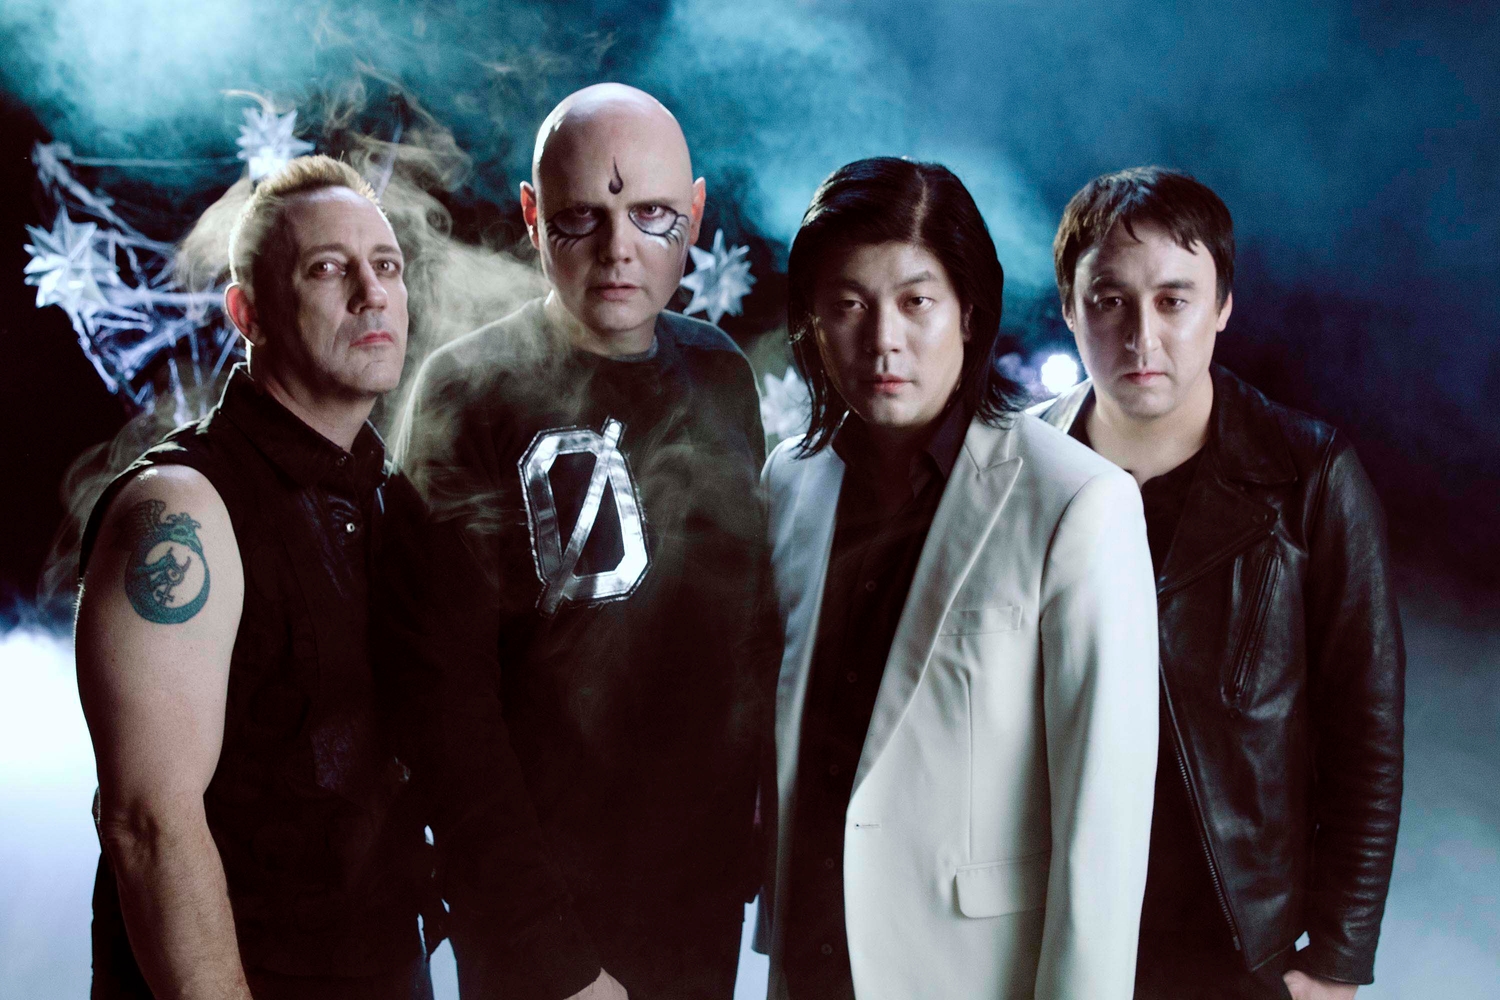 Smashing Pumpkins, The Hives, Black Midi and more added to Mad Cool 2019